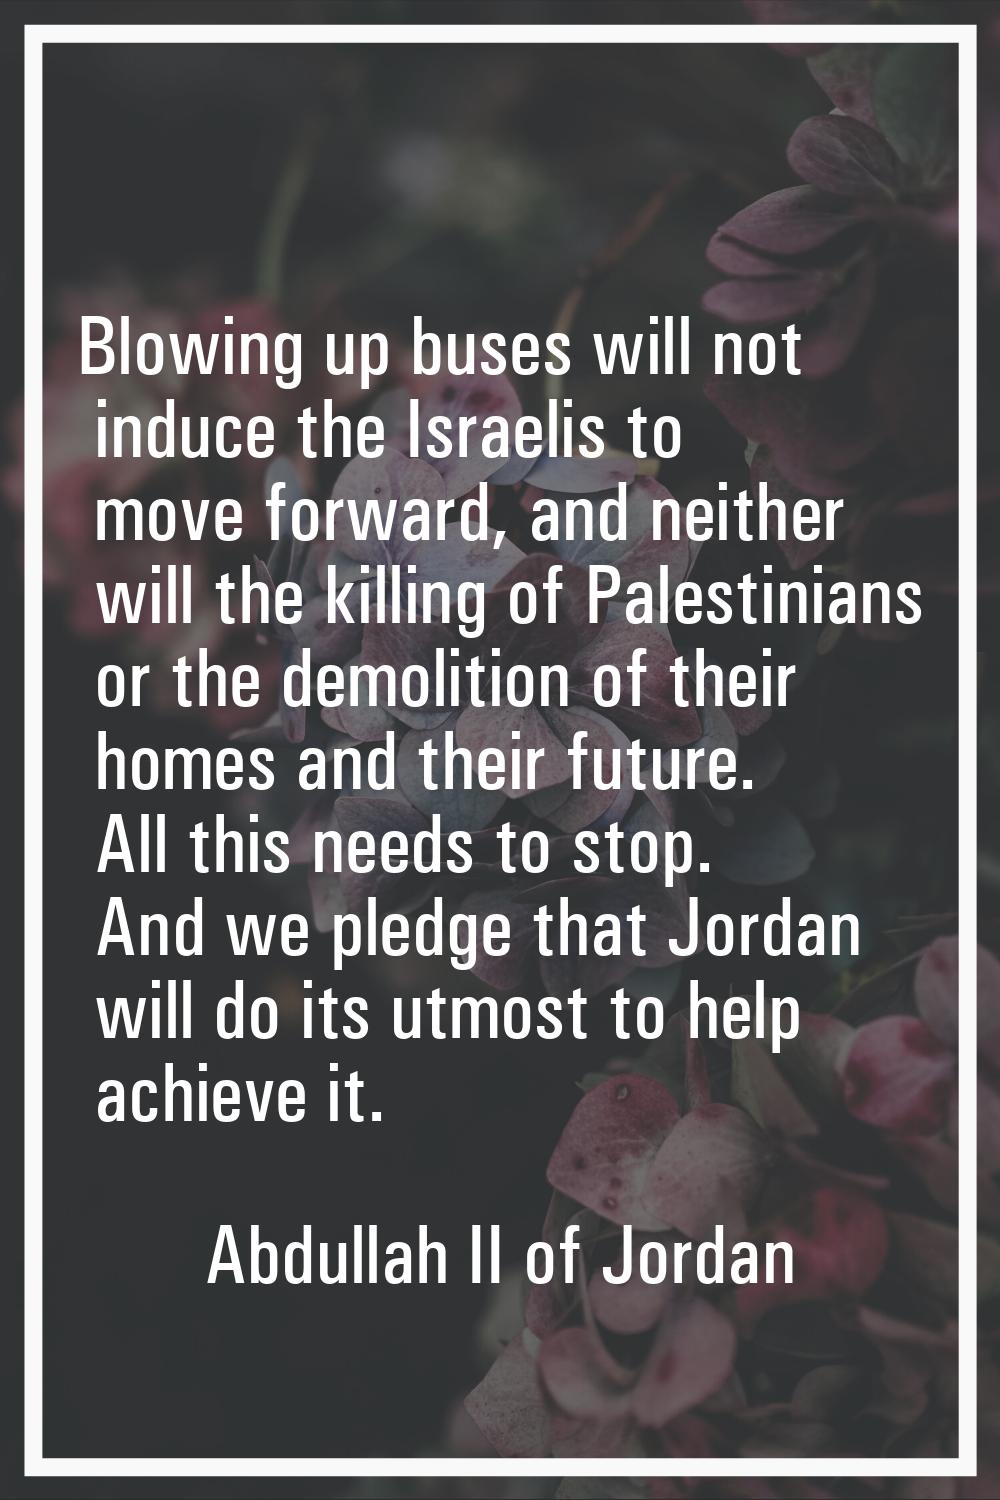 Blowing up buses will not induce the Israelis to move forward, and neither will the killing of Pale